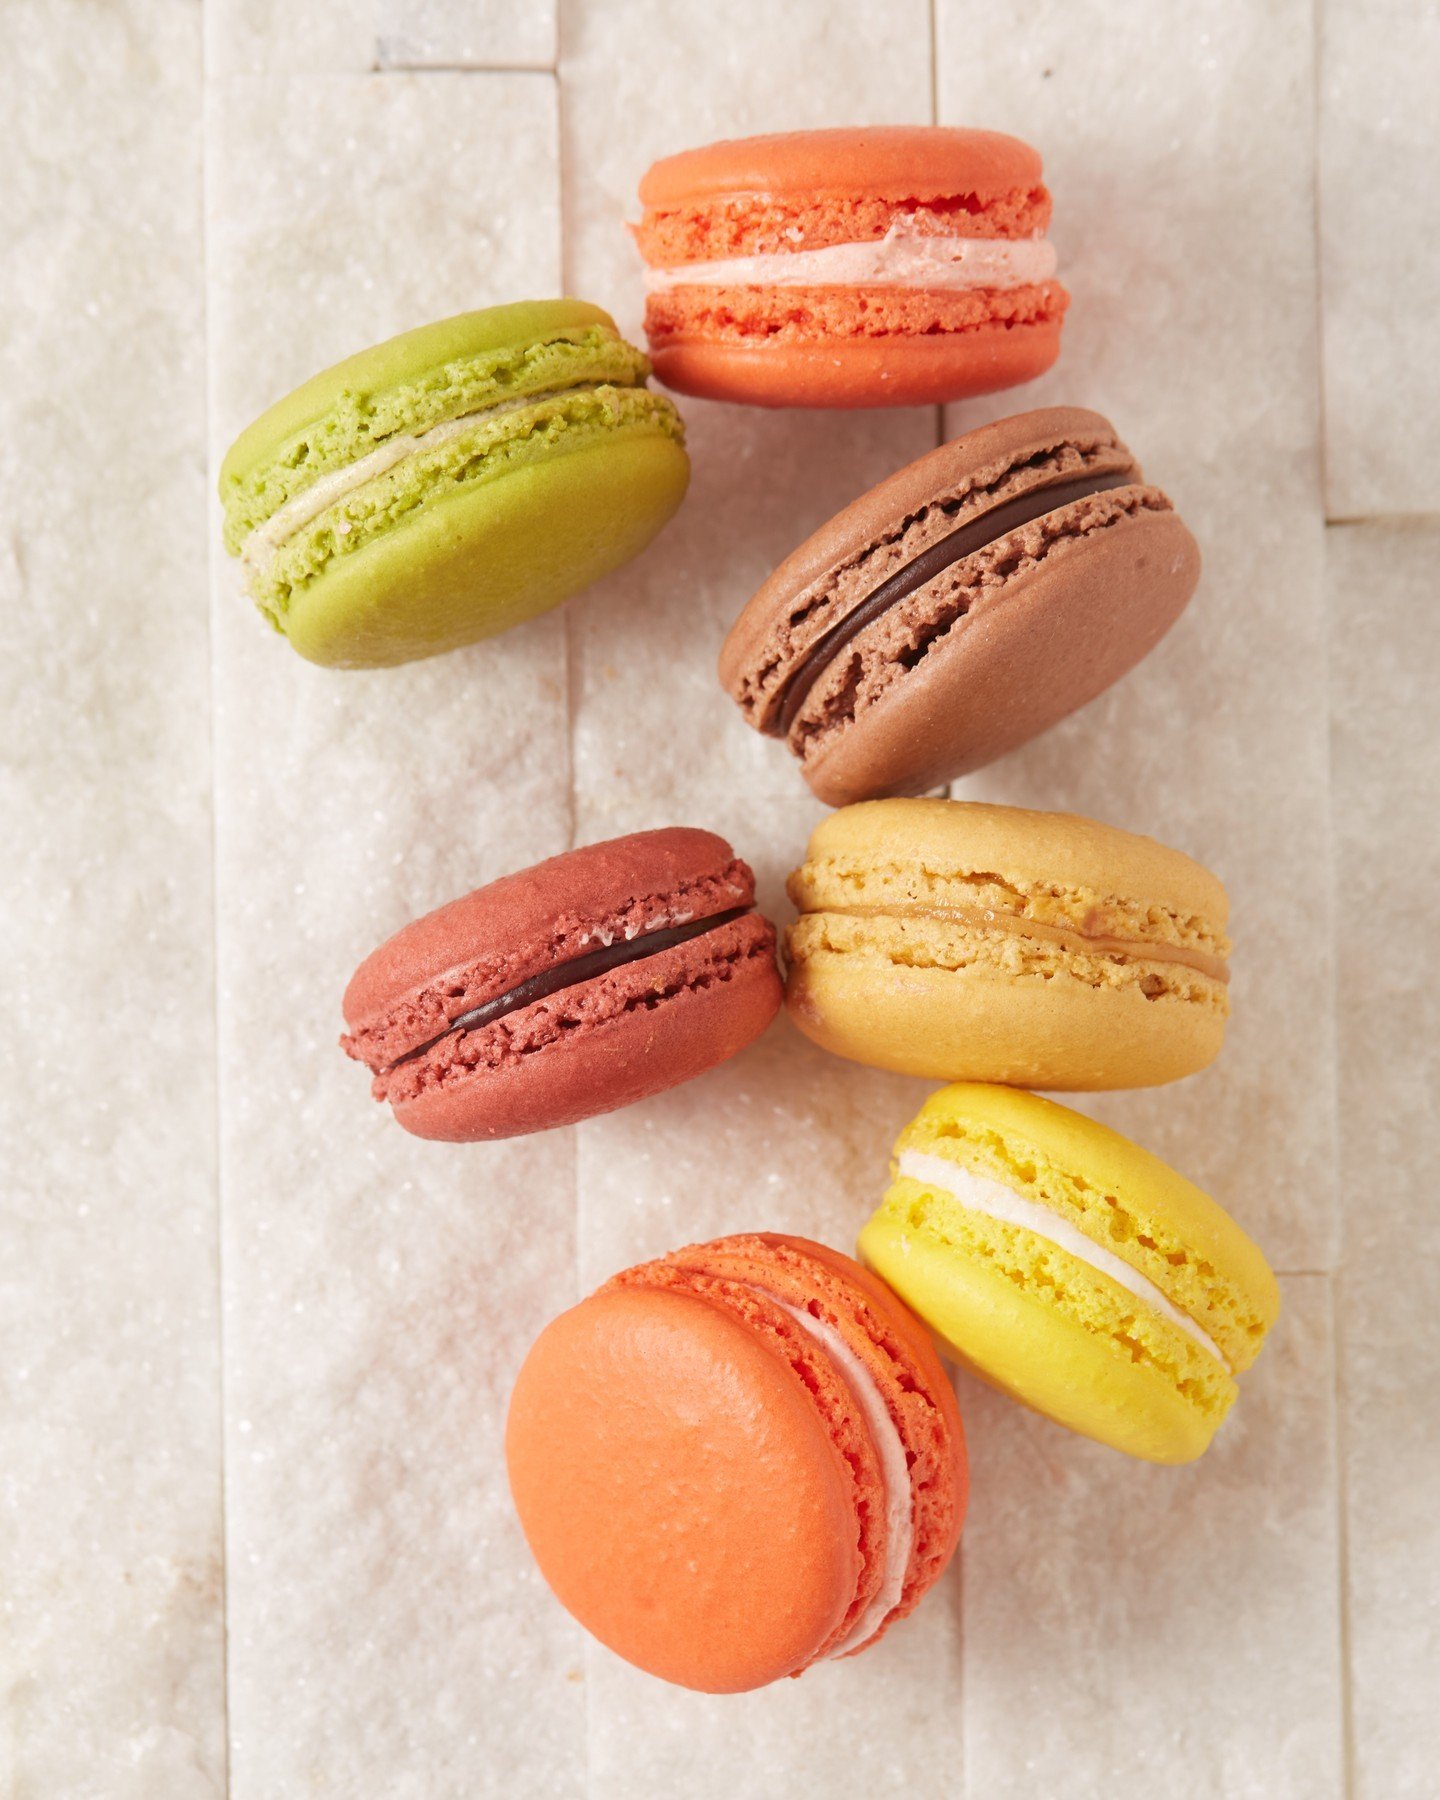 Our macarons are made in house every day in a variety of seasonal flavors. These sweet sandwich cookies are perfect on-the-go, and make great gifts or favors for weddings and other events!